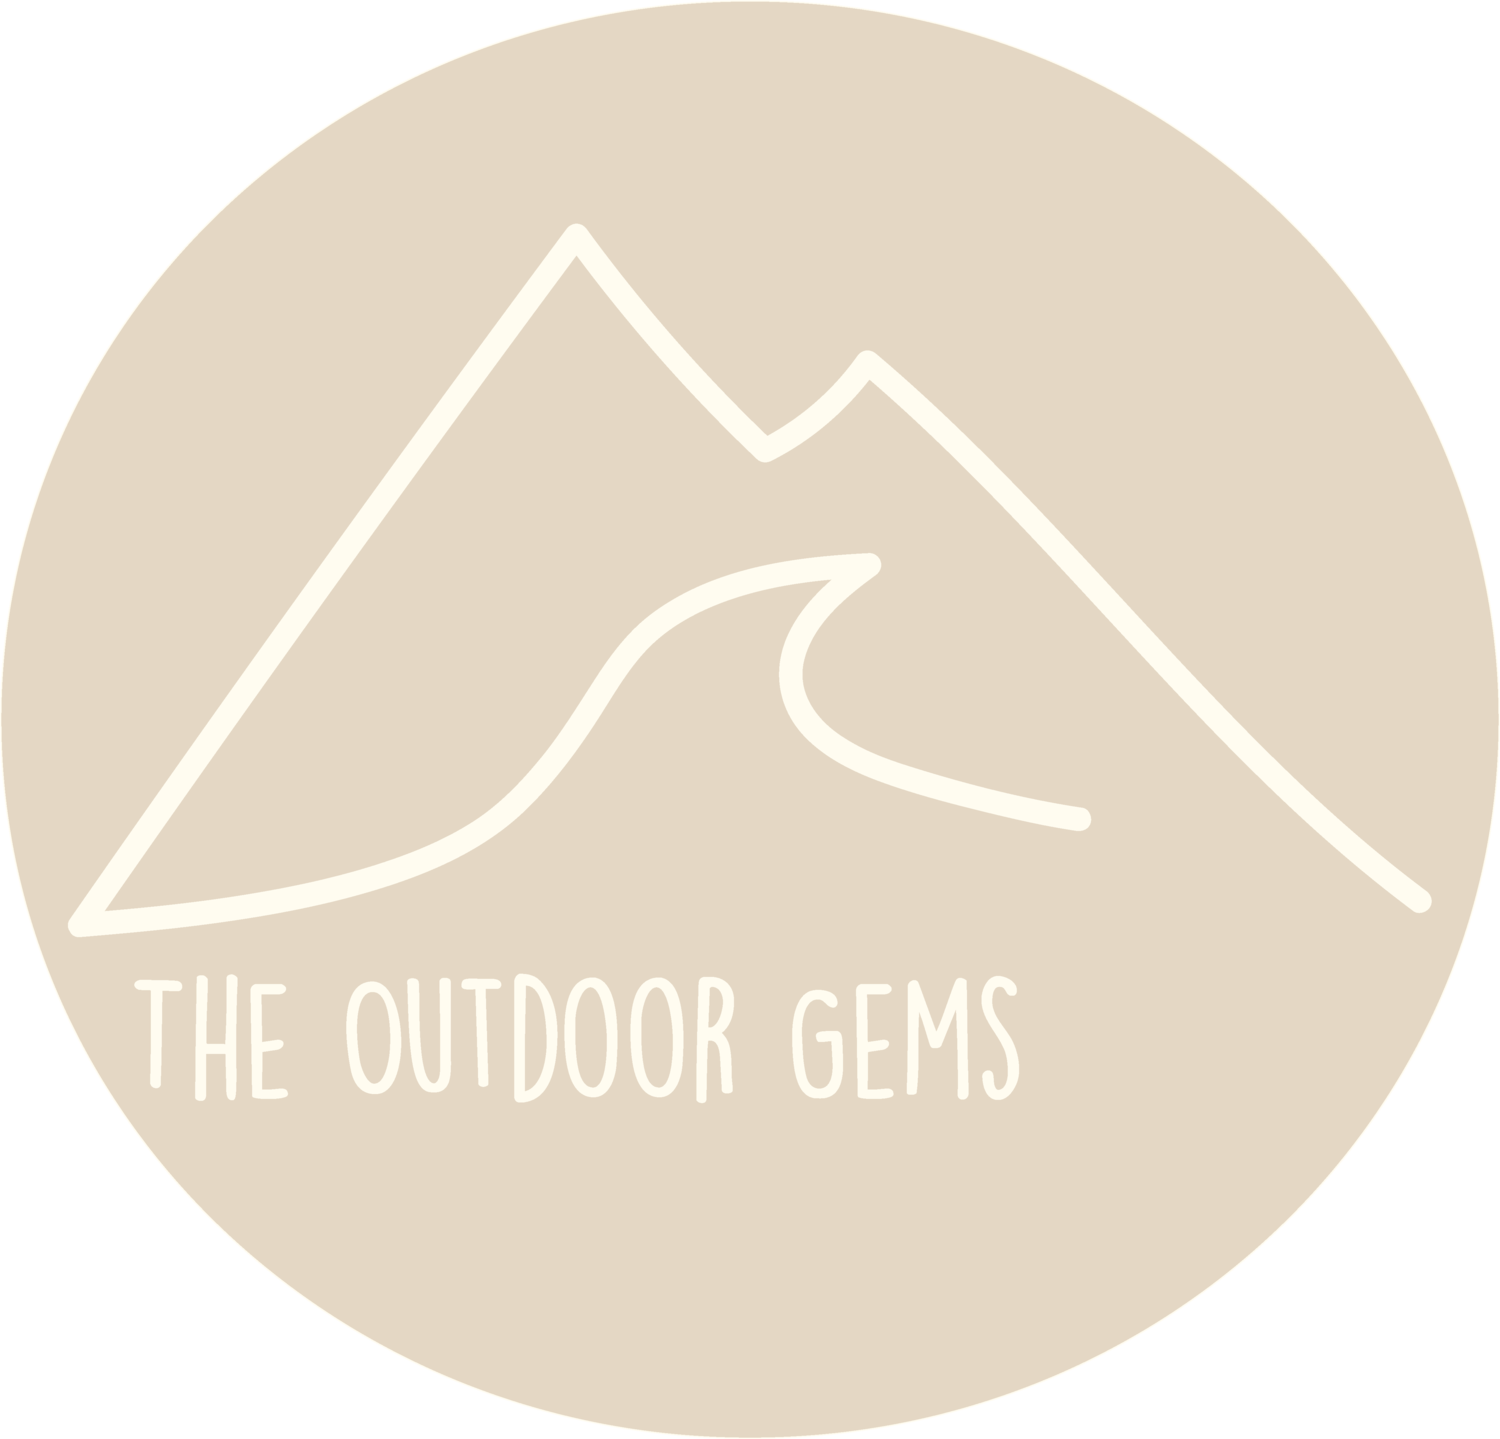 The Outdoor Gems